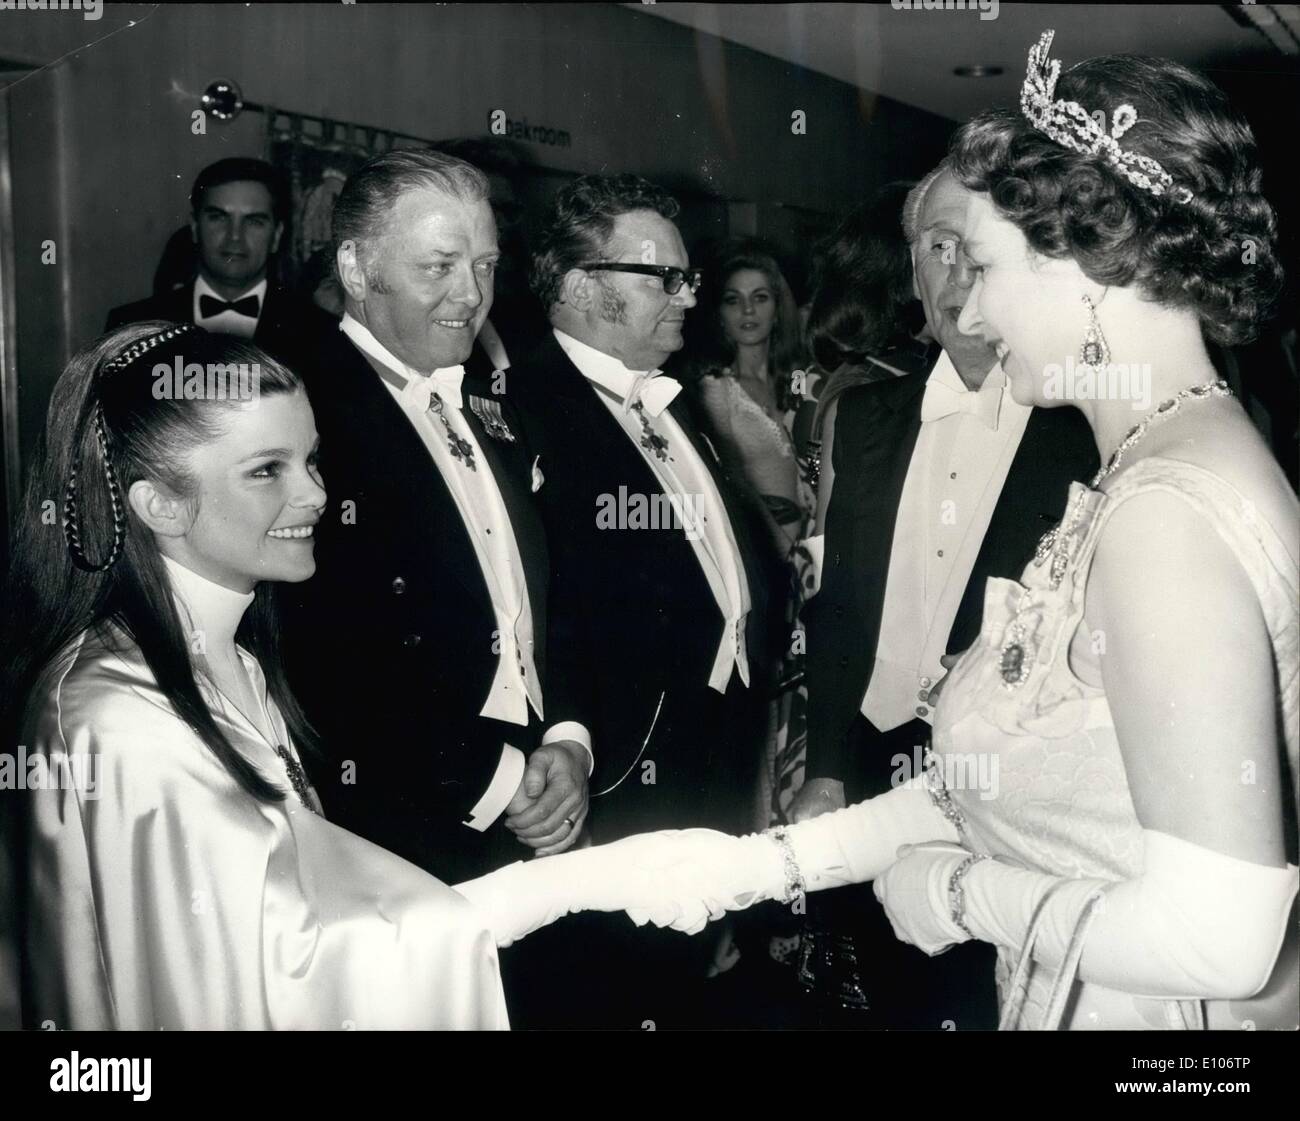 Feb. 02, 1970 - Royal Film Performance. H.M. The Queen talking to Genevieve Bujold, who plays Anne Boleyn in ''Anne of the Thousand Days'', before the Royal Film performance at the Odeon, Leicester Square, London, last night. In the background are Actor/Director Richard Attenborough (left) and Singer/Comedian Harry Secombe. The Royal Film Performance is in aid of the Cinema and Television Benevolent Fund. Stock Photo